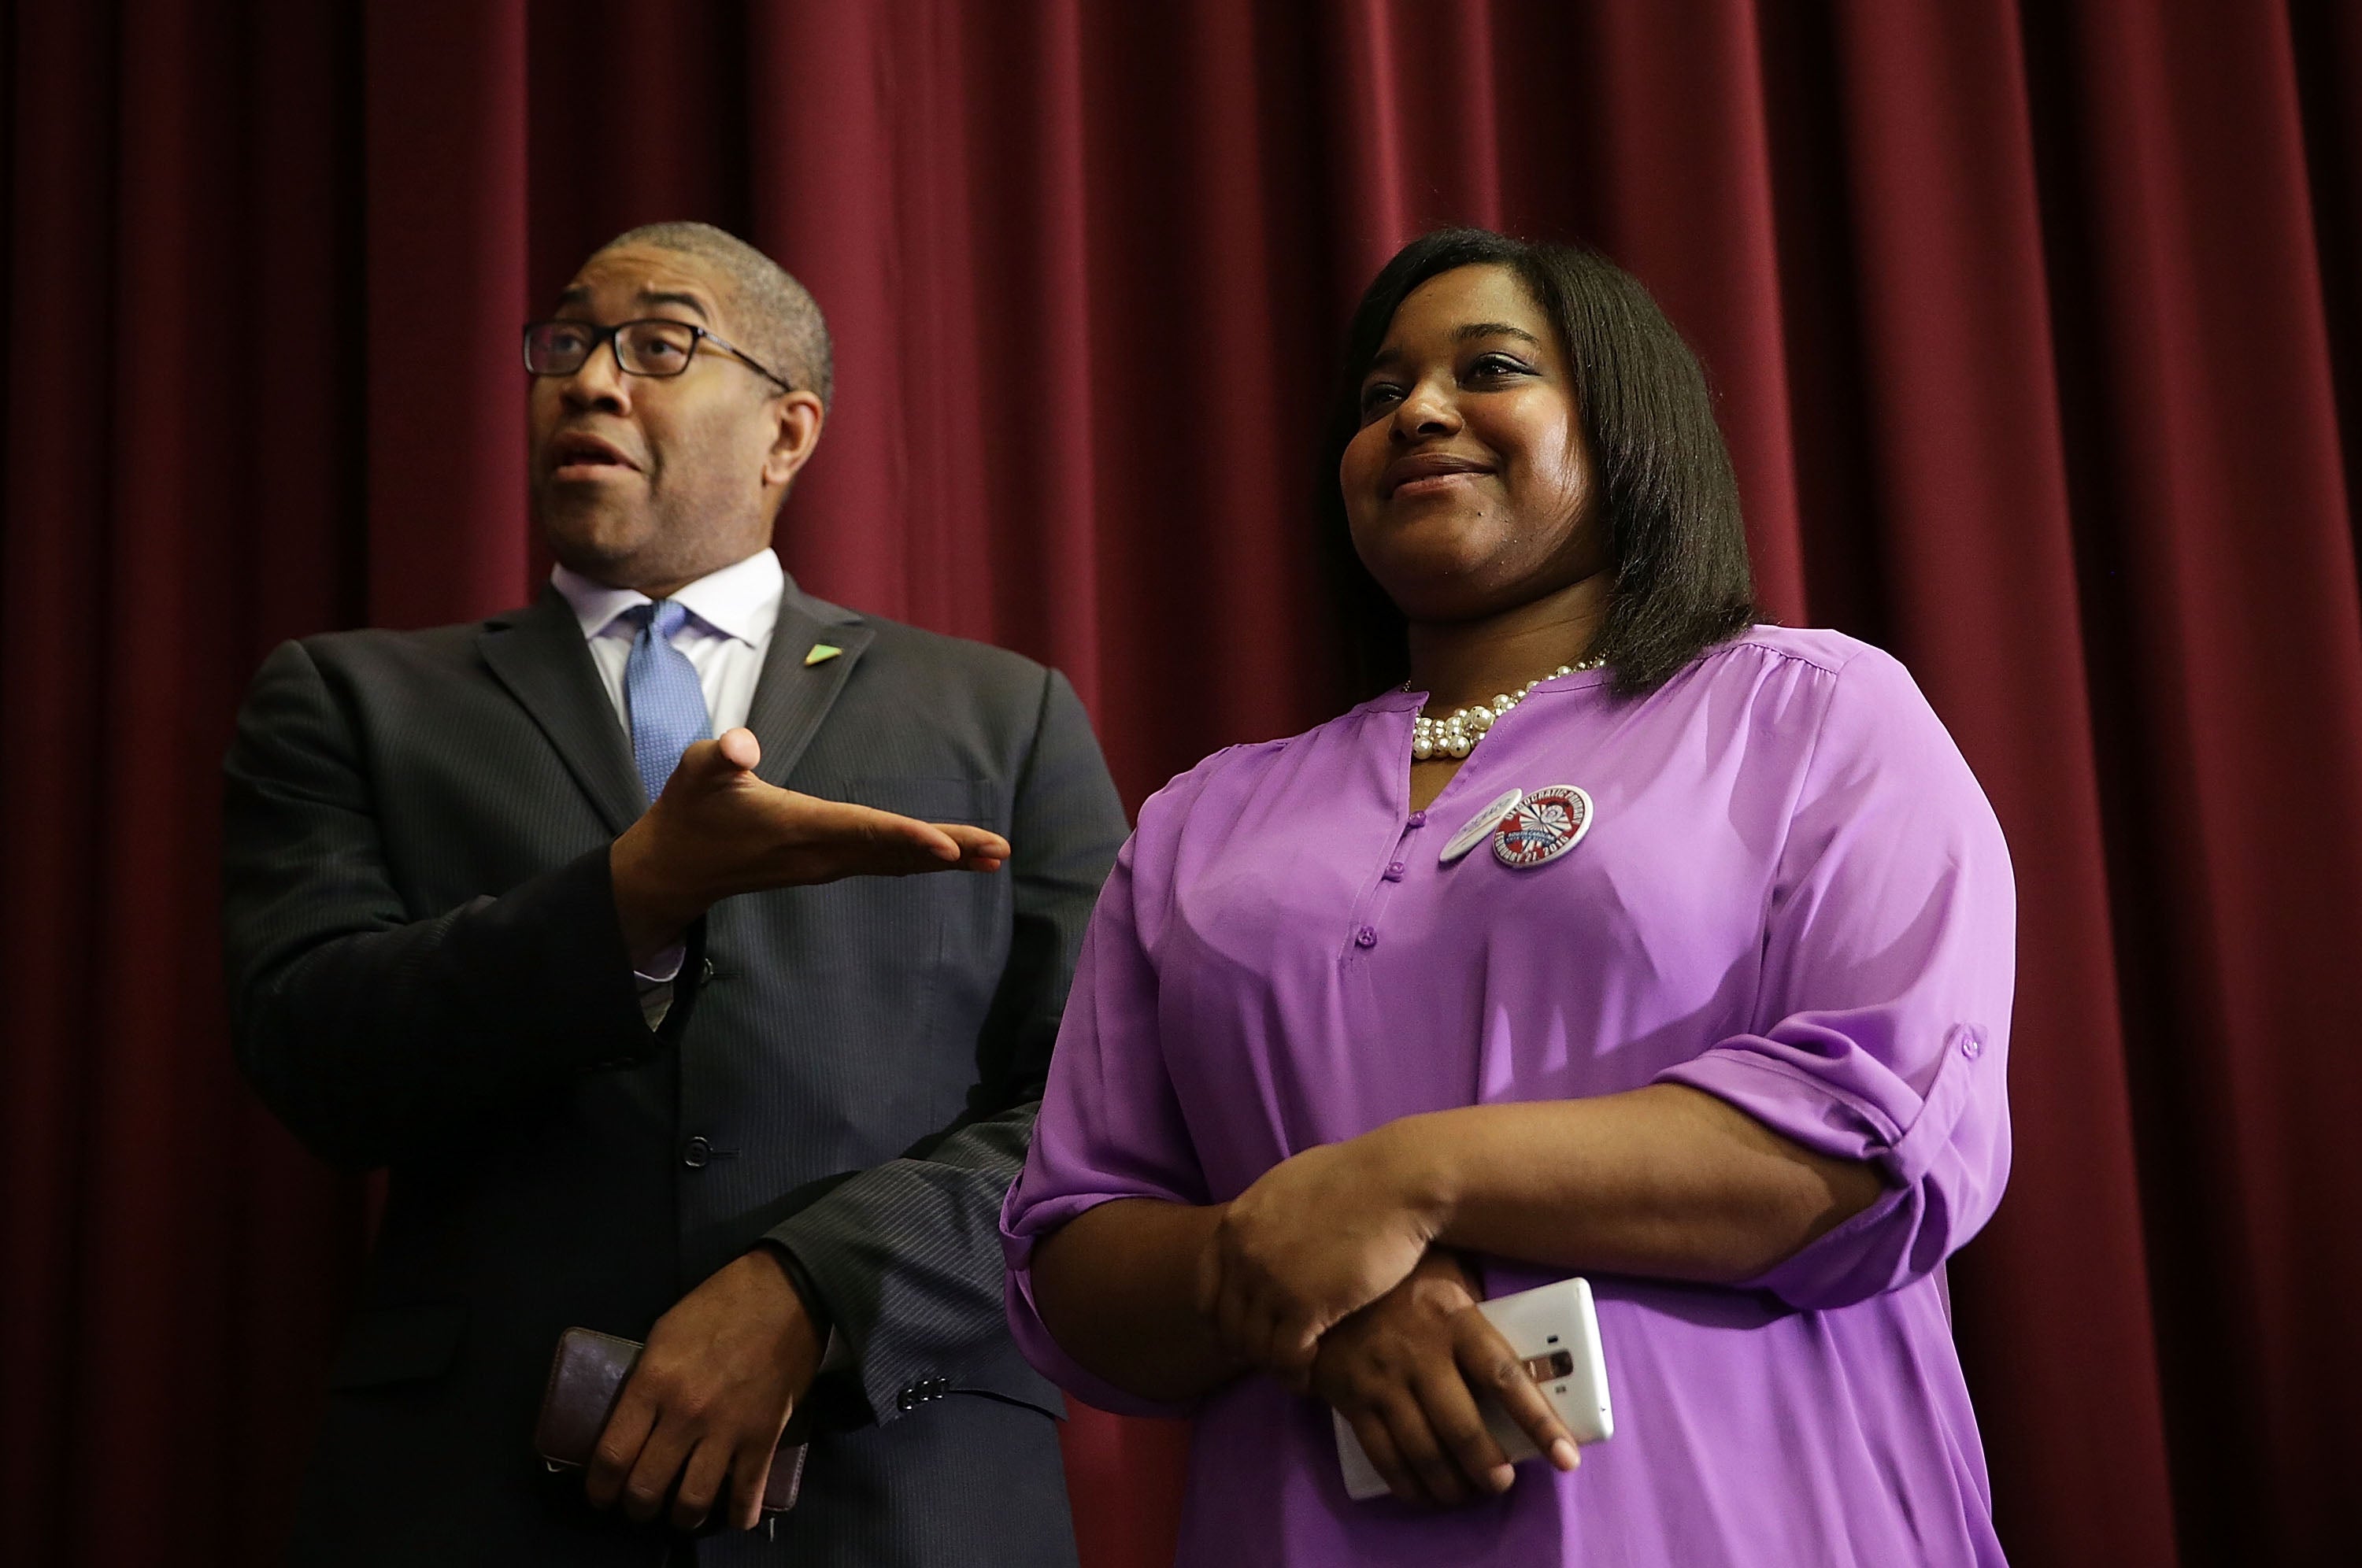 10 Things To Know About Activist Erica Garner